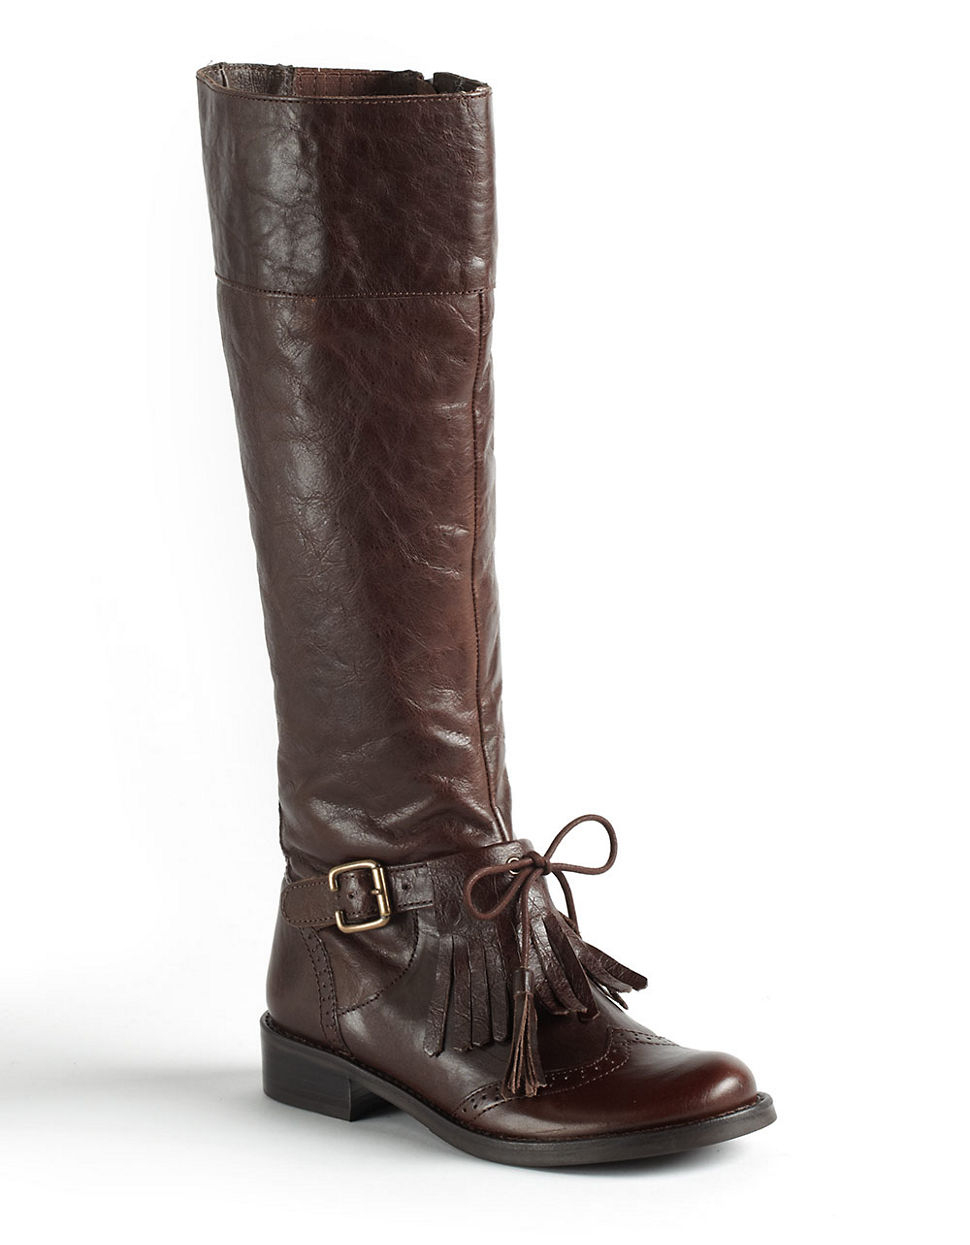 Matisse Welsh Leather Tall Boots in Brown (Espresso Leather) | Lyst